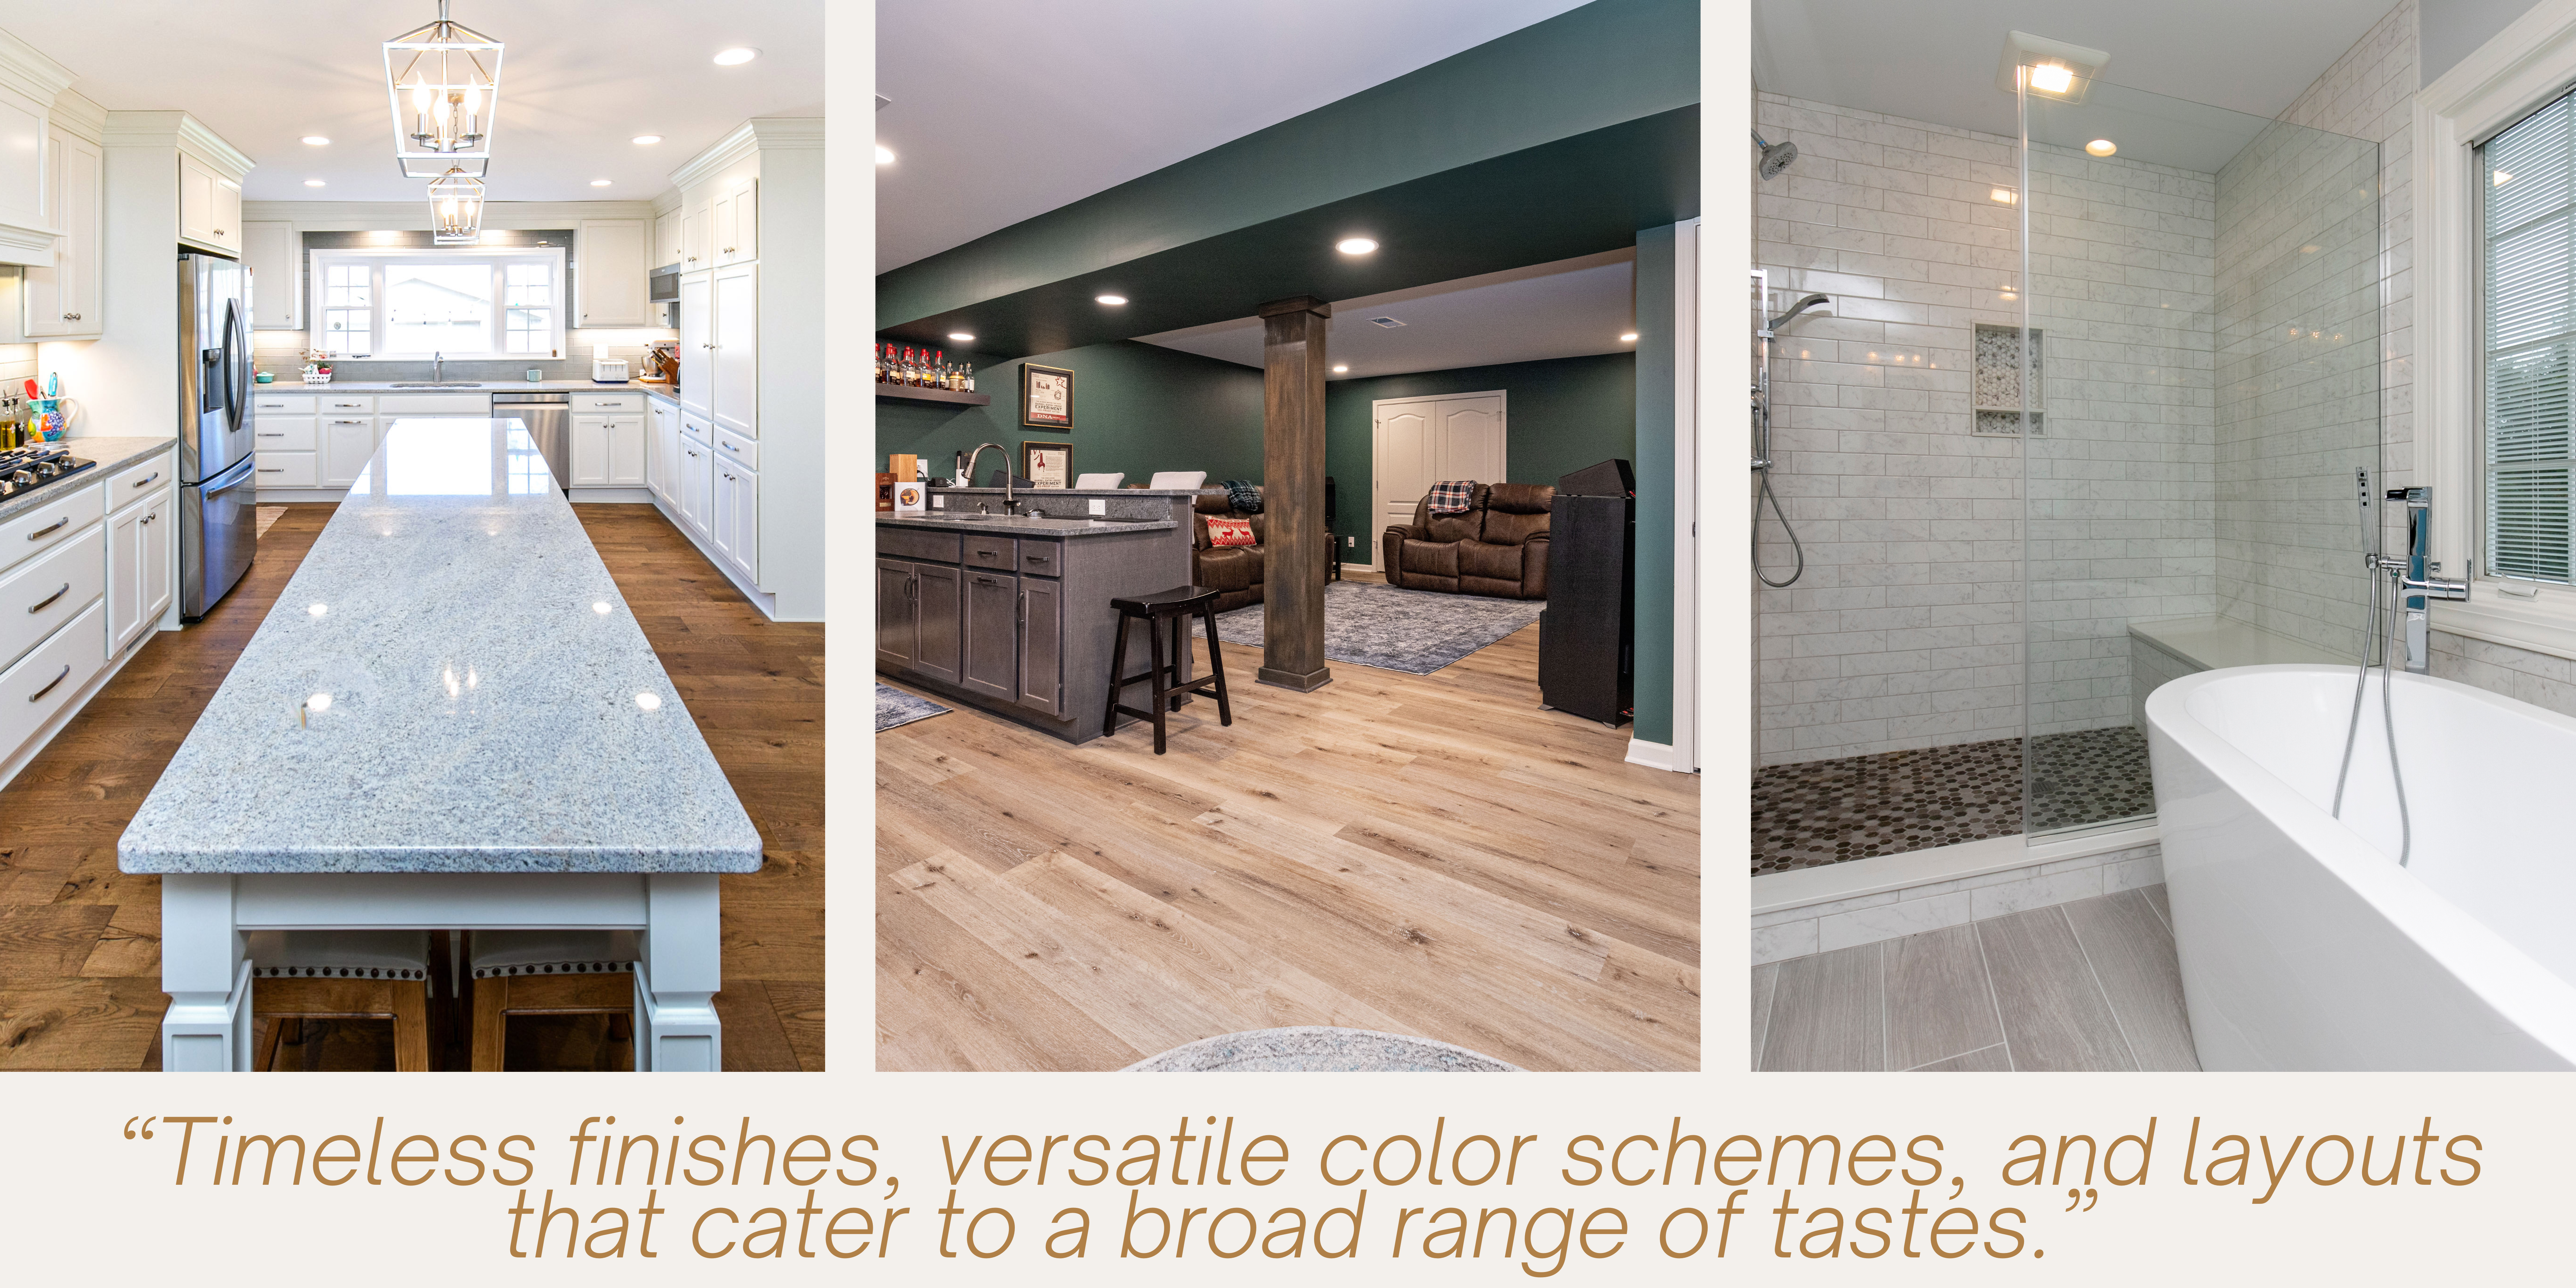 timeless finishes, versatile color schemes, and layouts that cater to a broad range of tastes.